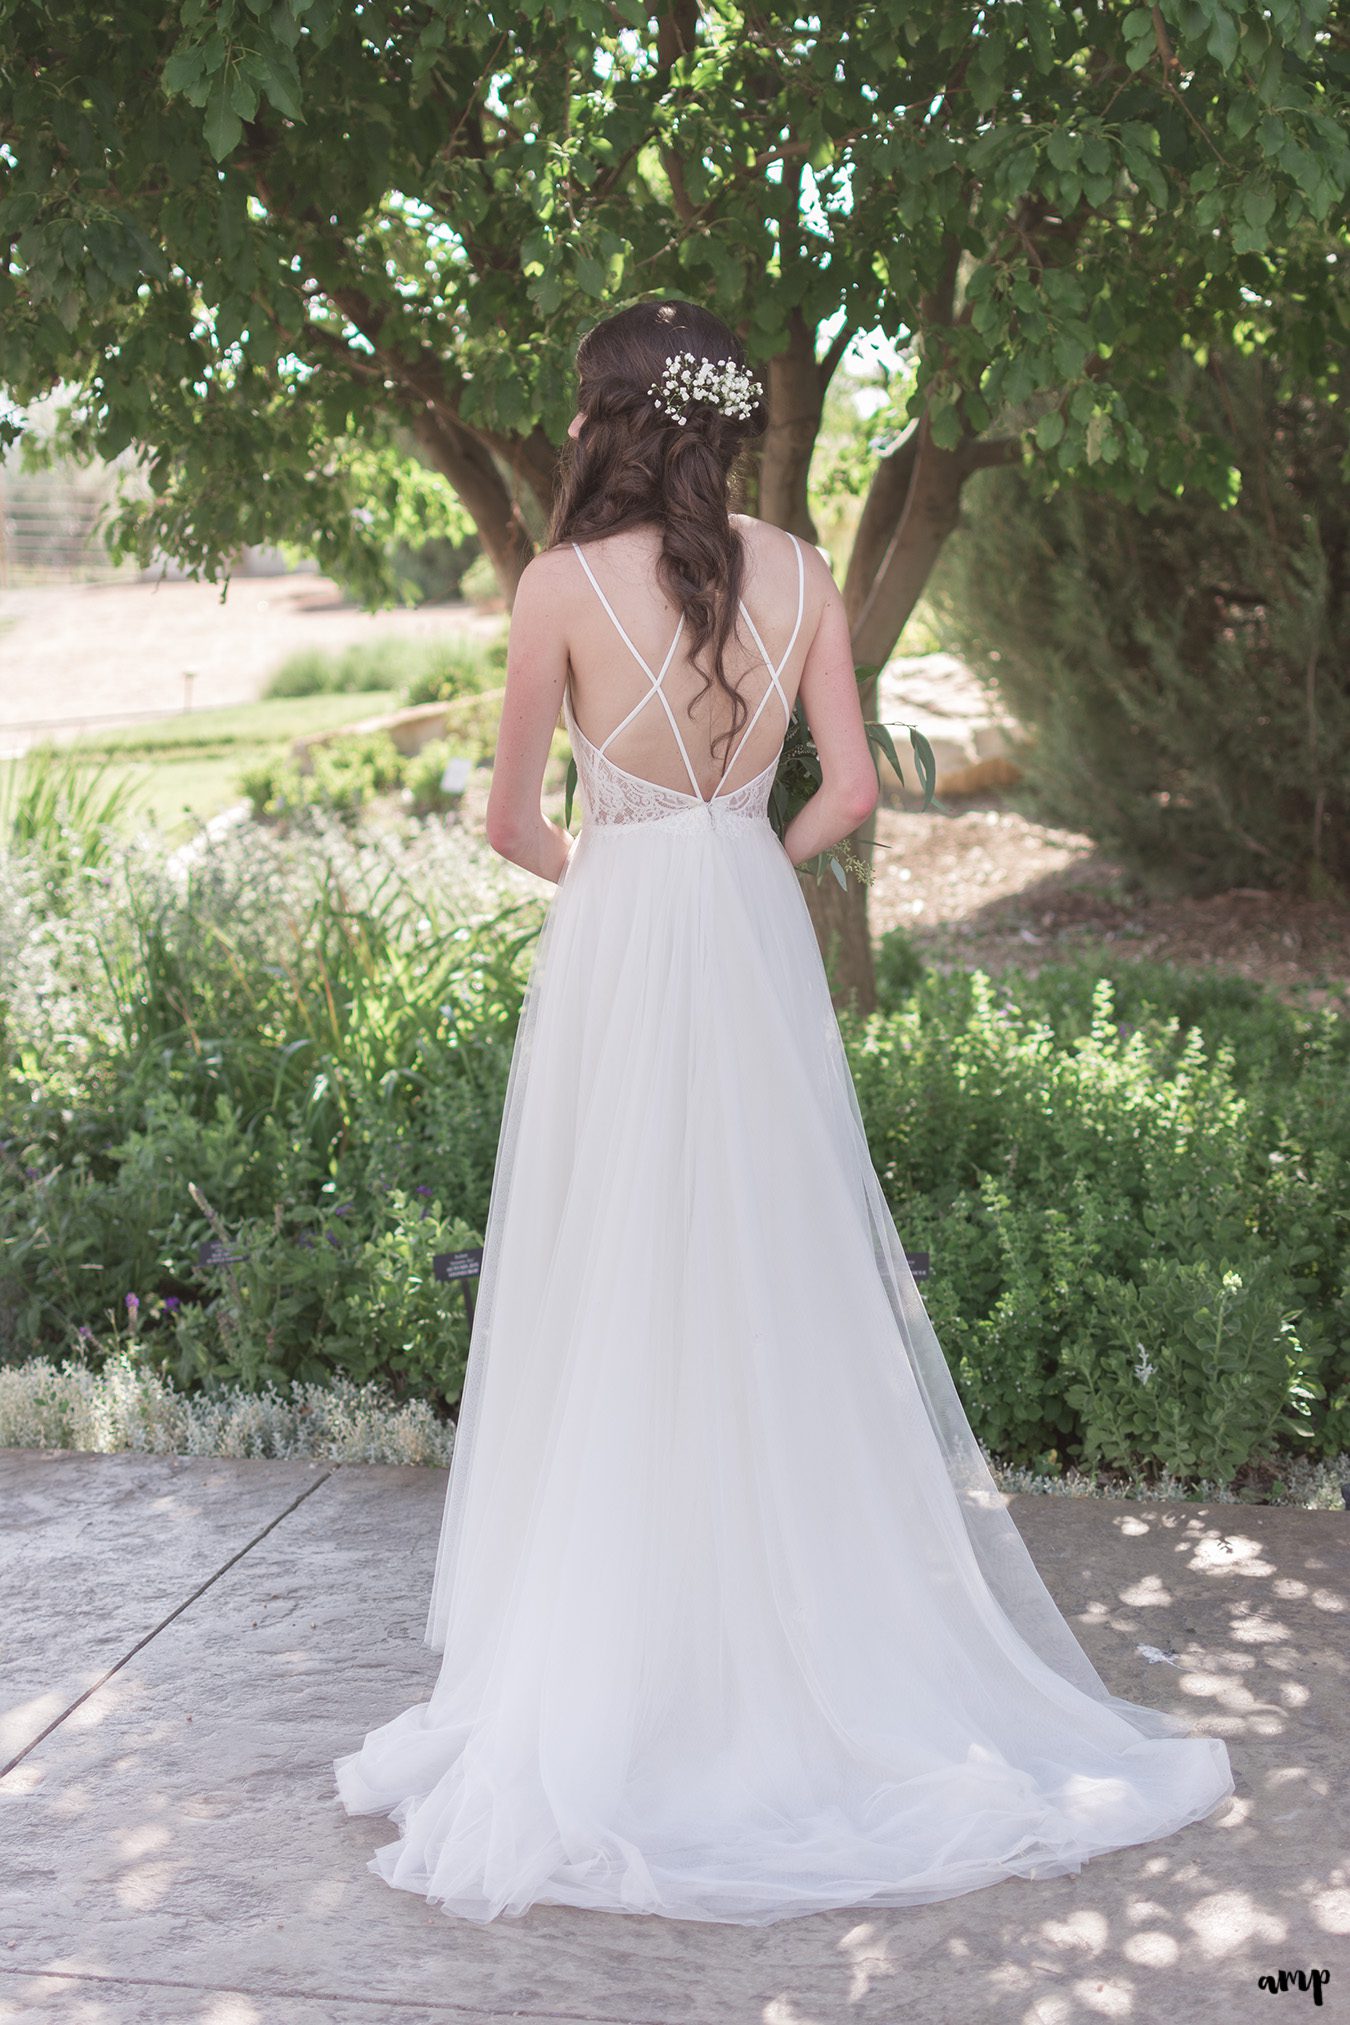 Back of the bride's dress